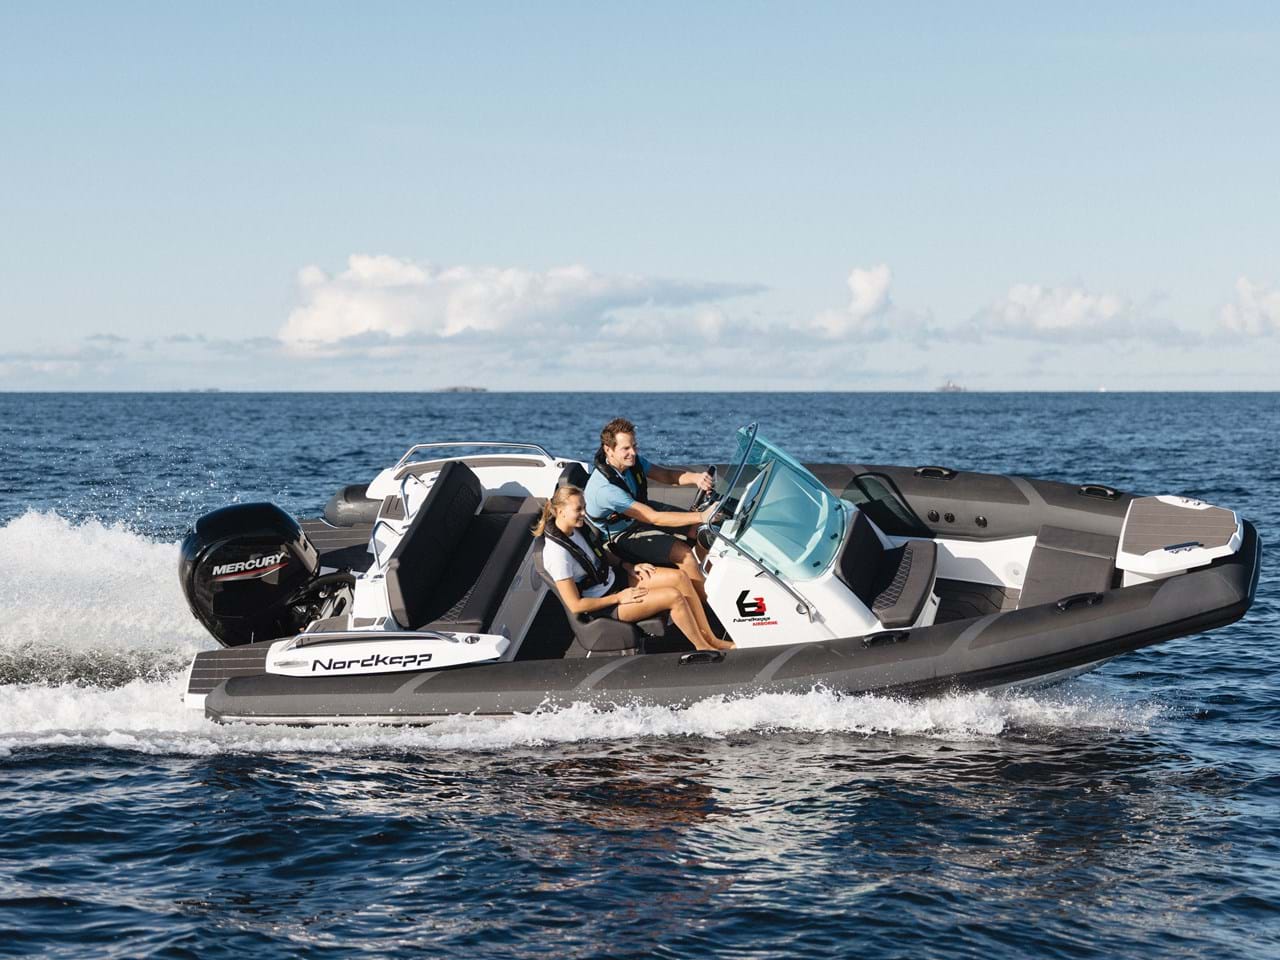 The Nordkapp Airborne 6.3 – a RIB designed to provide improved space and driving characteristics. 